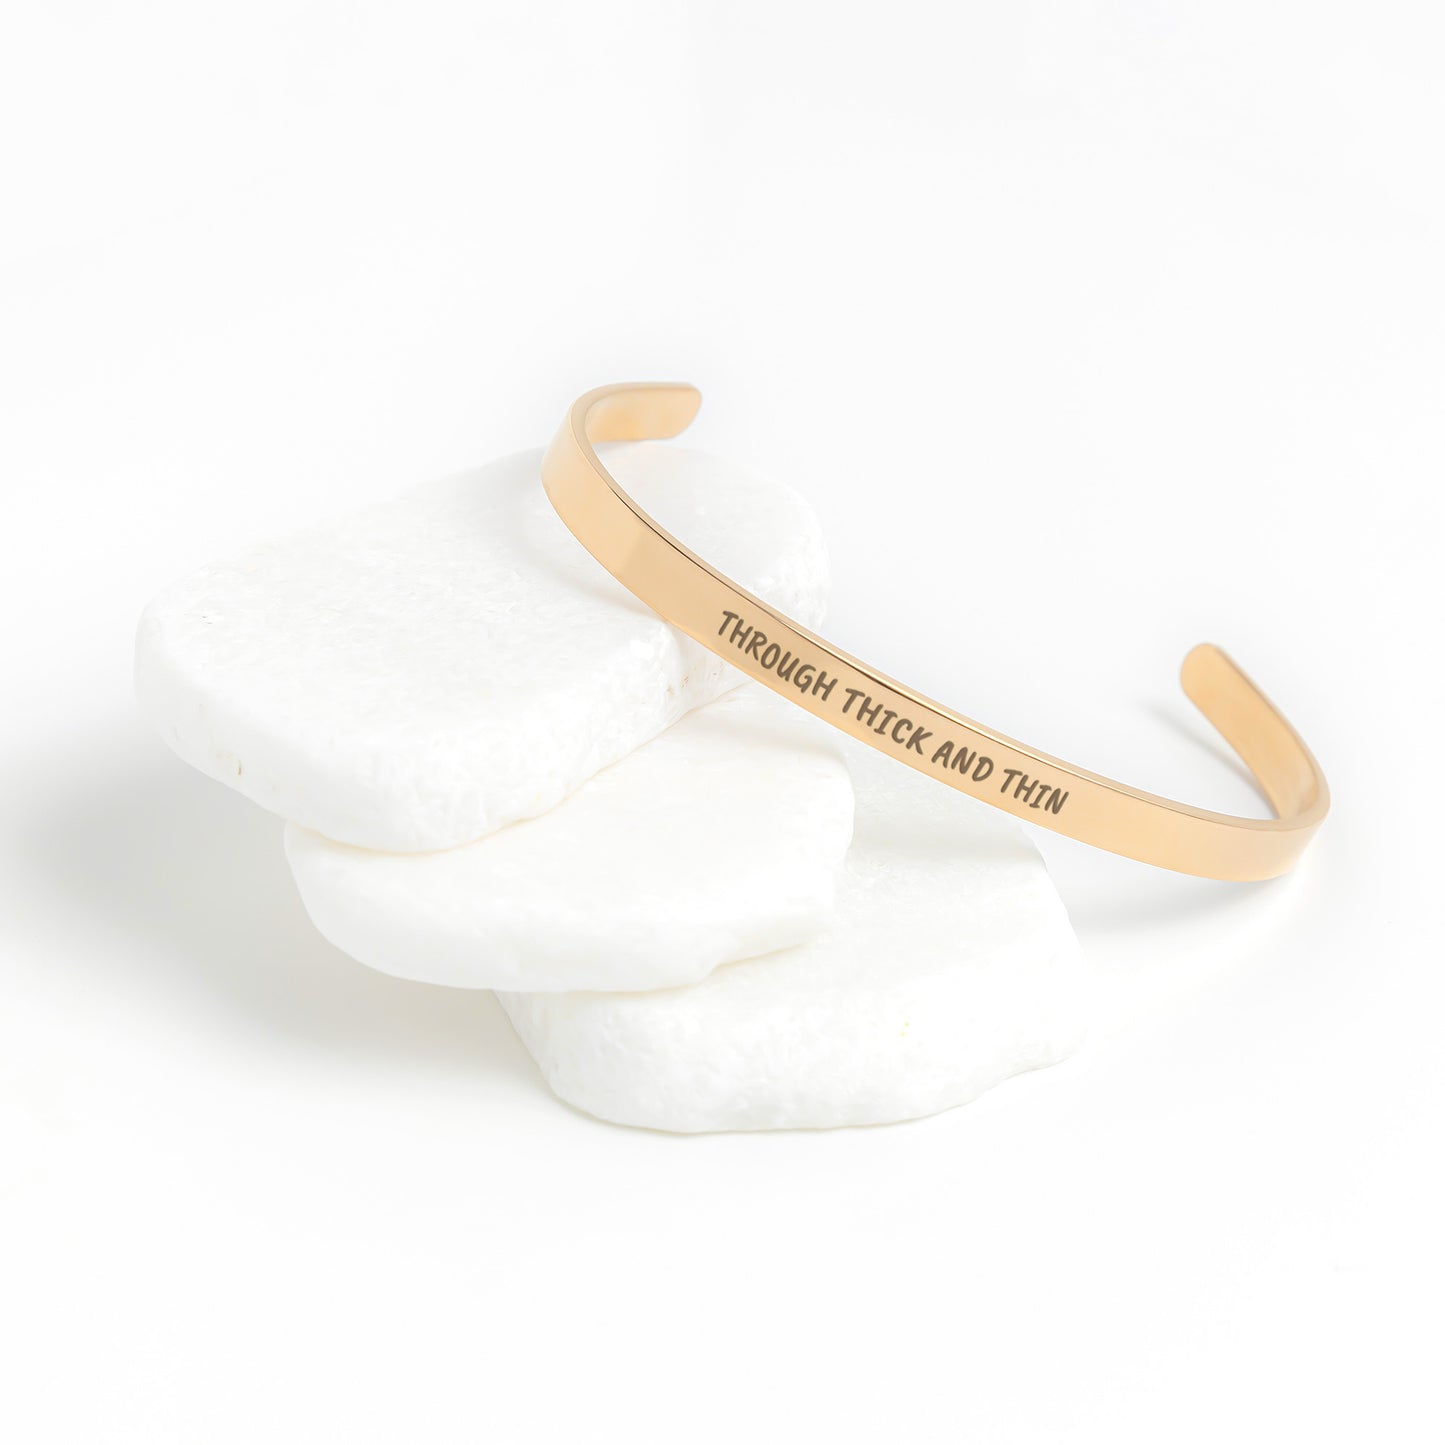 Through Thick And Thin Cuff Bracelet